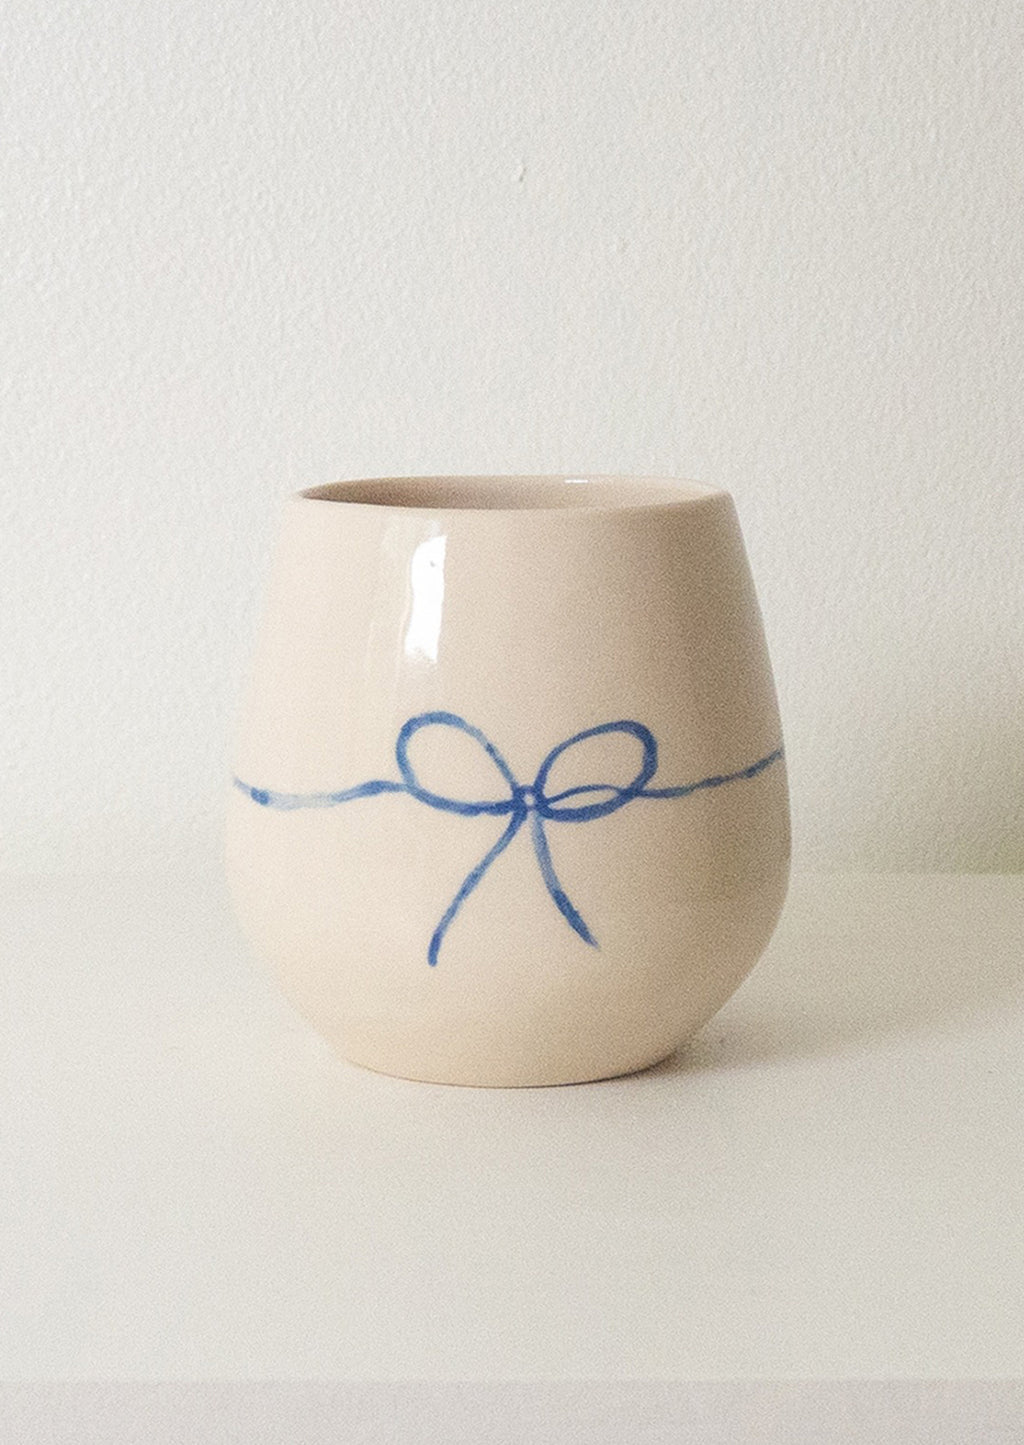 1: A white rounded ceramic cup with hand painted blue bow.